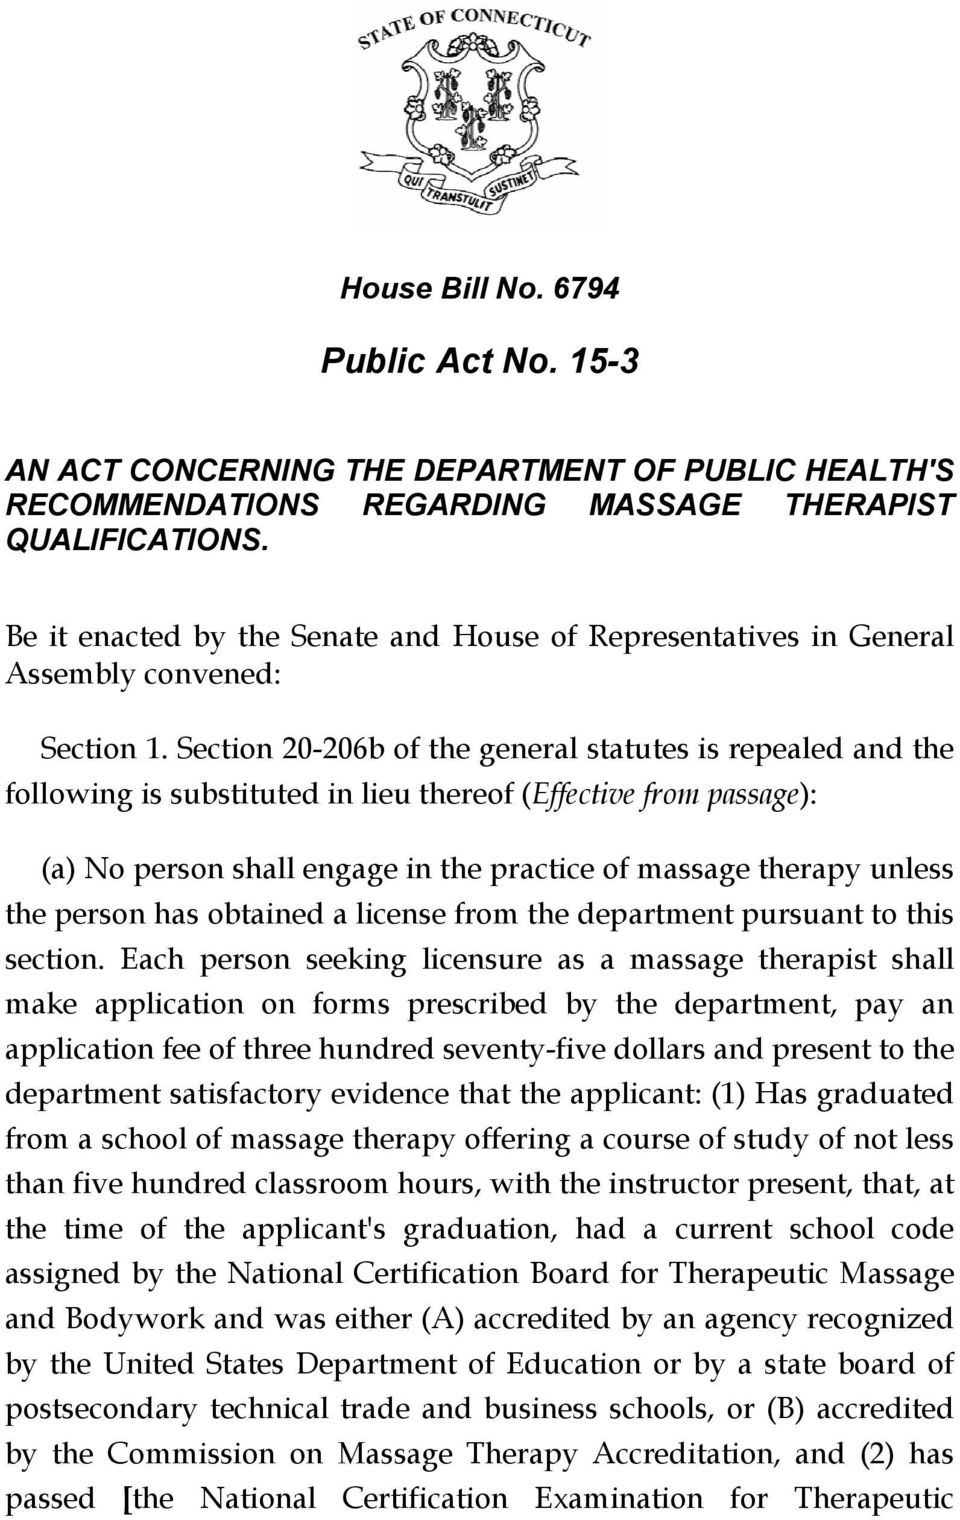 Section 20-206b of the general statutes is repealed and the following is substituted in lieu thereof (Effective from passage): (a) No person shall engage in the practice of massage therapy unless the